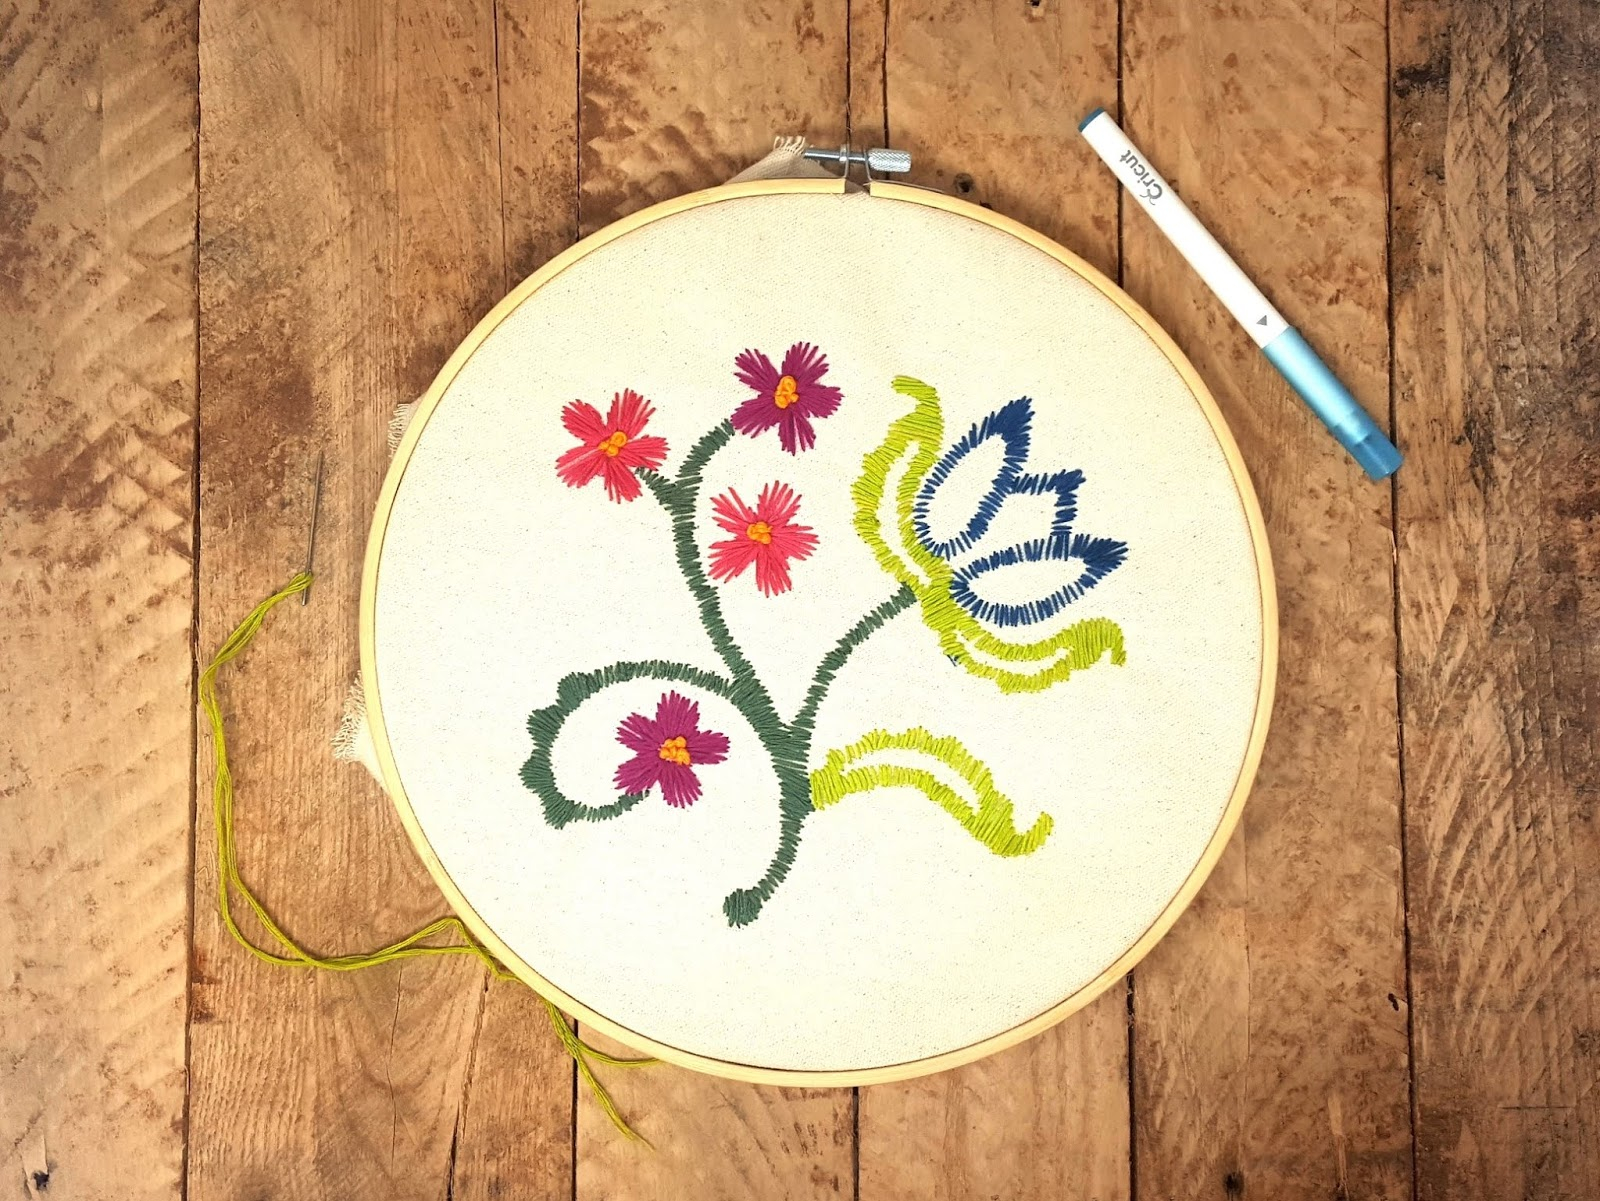 Embroidery Pattern Maker Cut N Edge Crafts The Write Stuff Challenge Week 7 Embroidery